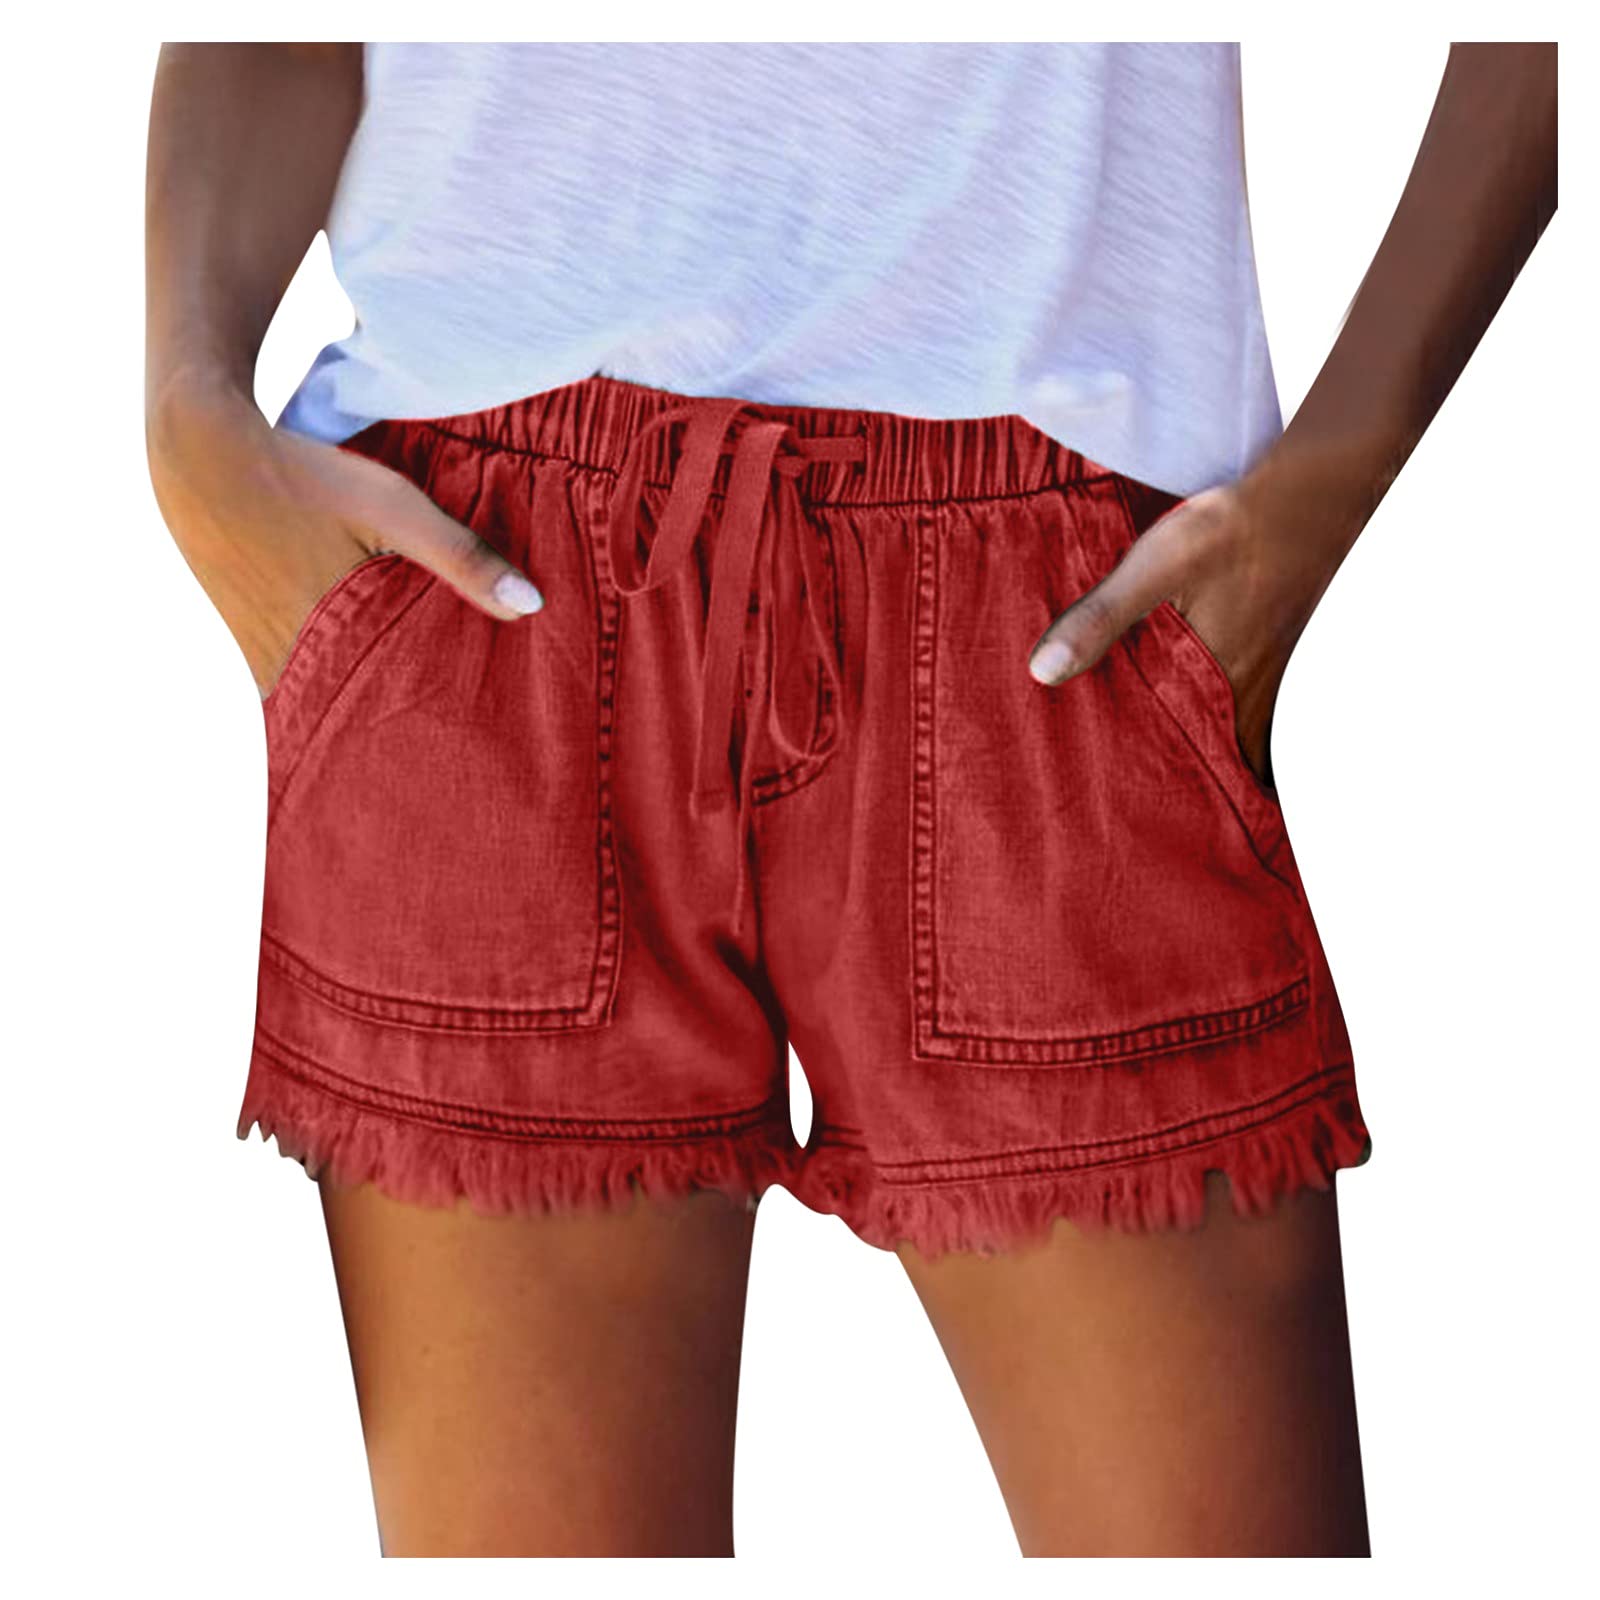 Vintage High Waist Stretch Blue Denim Shorts Womens For Women Crimping Hip  Lift, Hip Control, And Push Up Perfect For Summer Fashion And Street Style  Style #230619 From Bian01, $17.7 | DHgate.Com